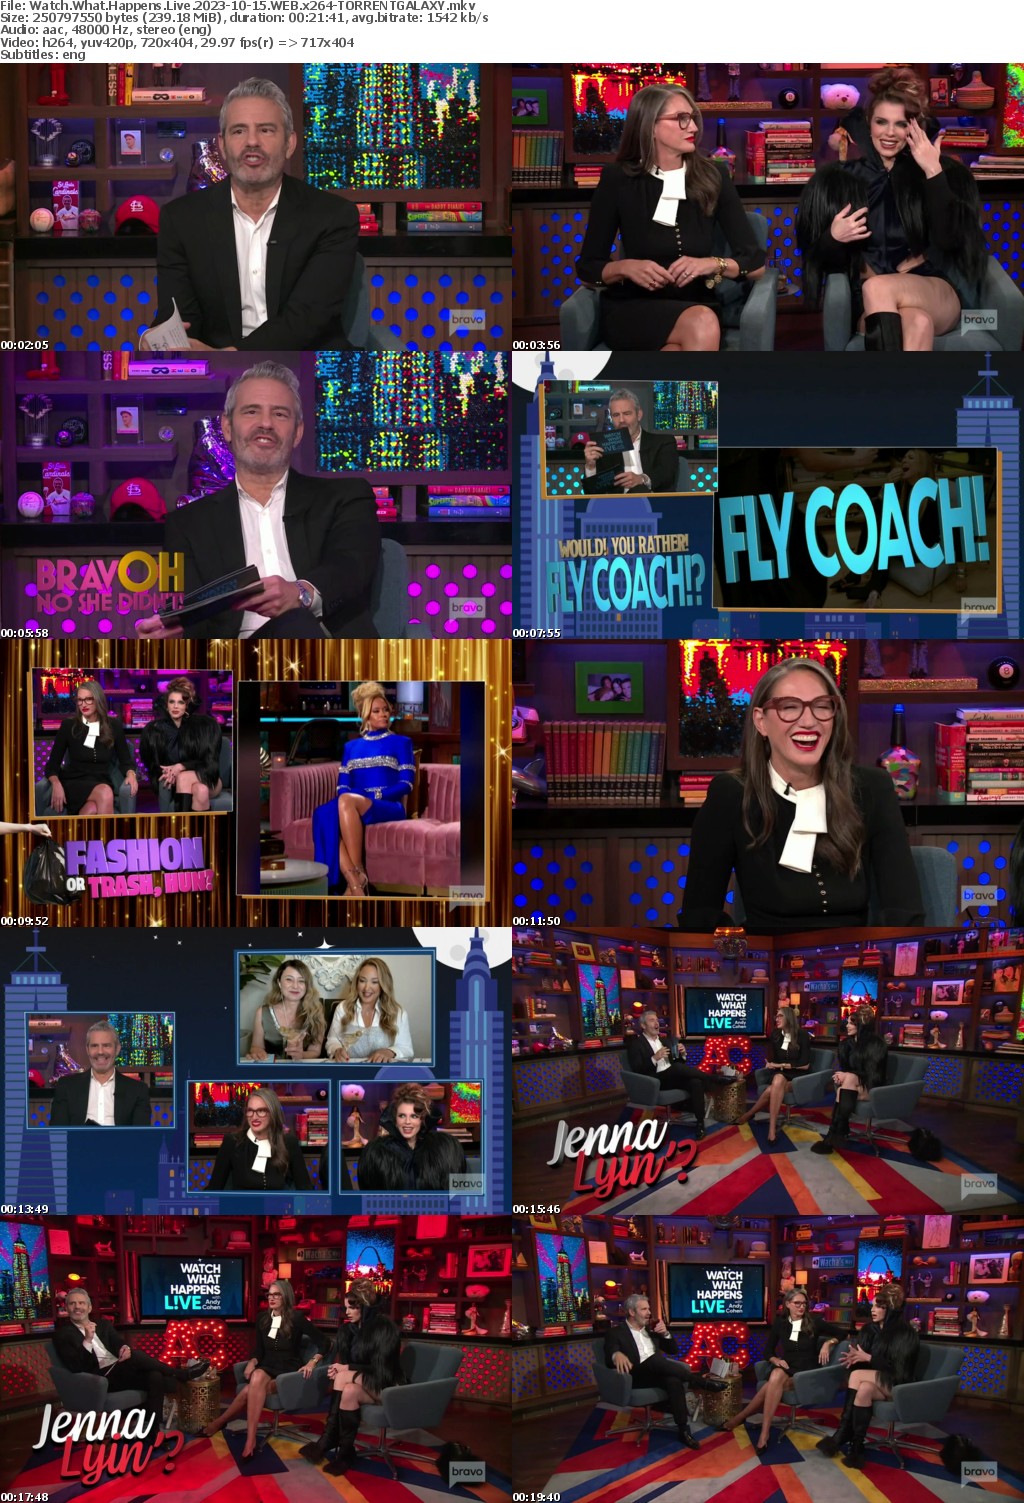 Watch What Happens Live 2023-10-15 WEB x264-GALAXY